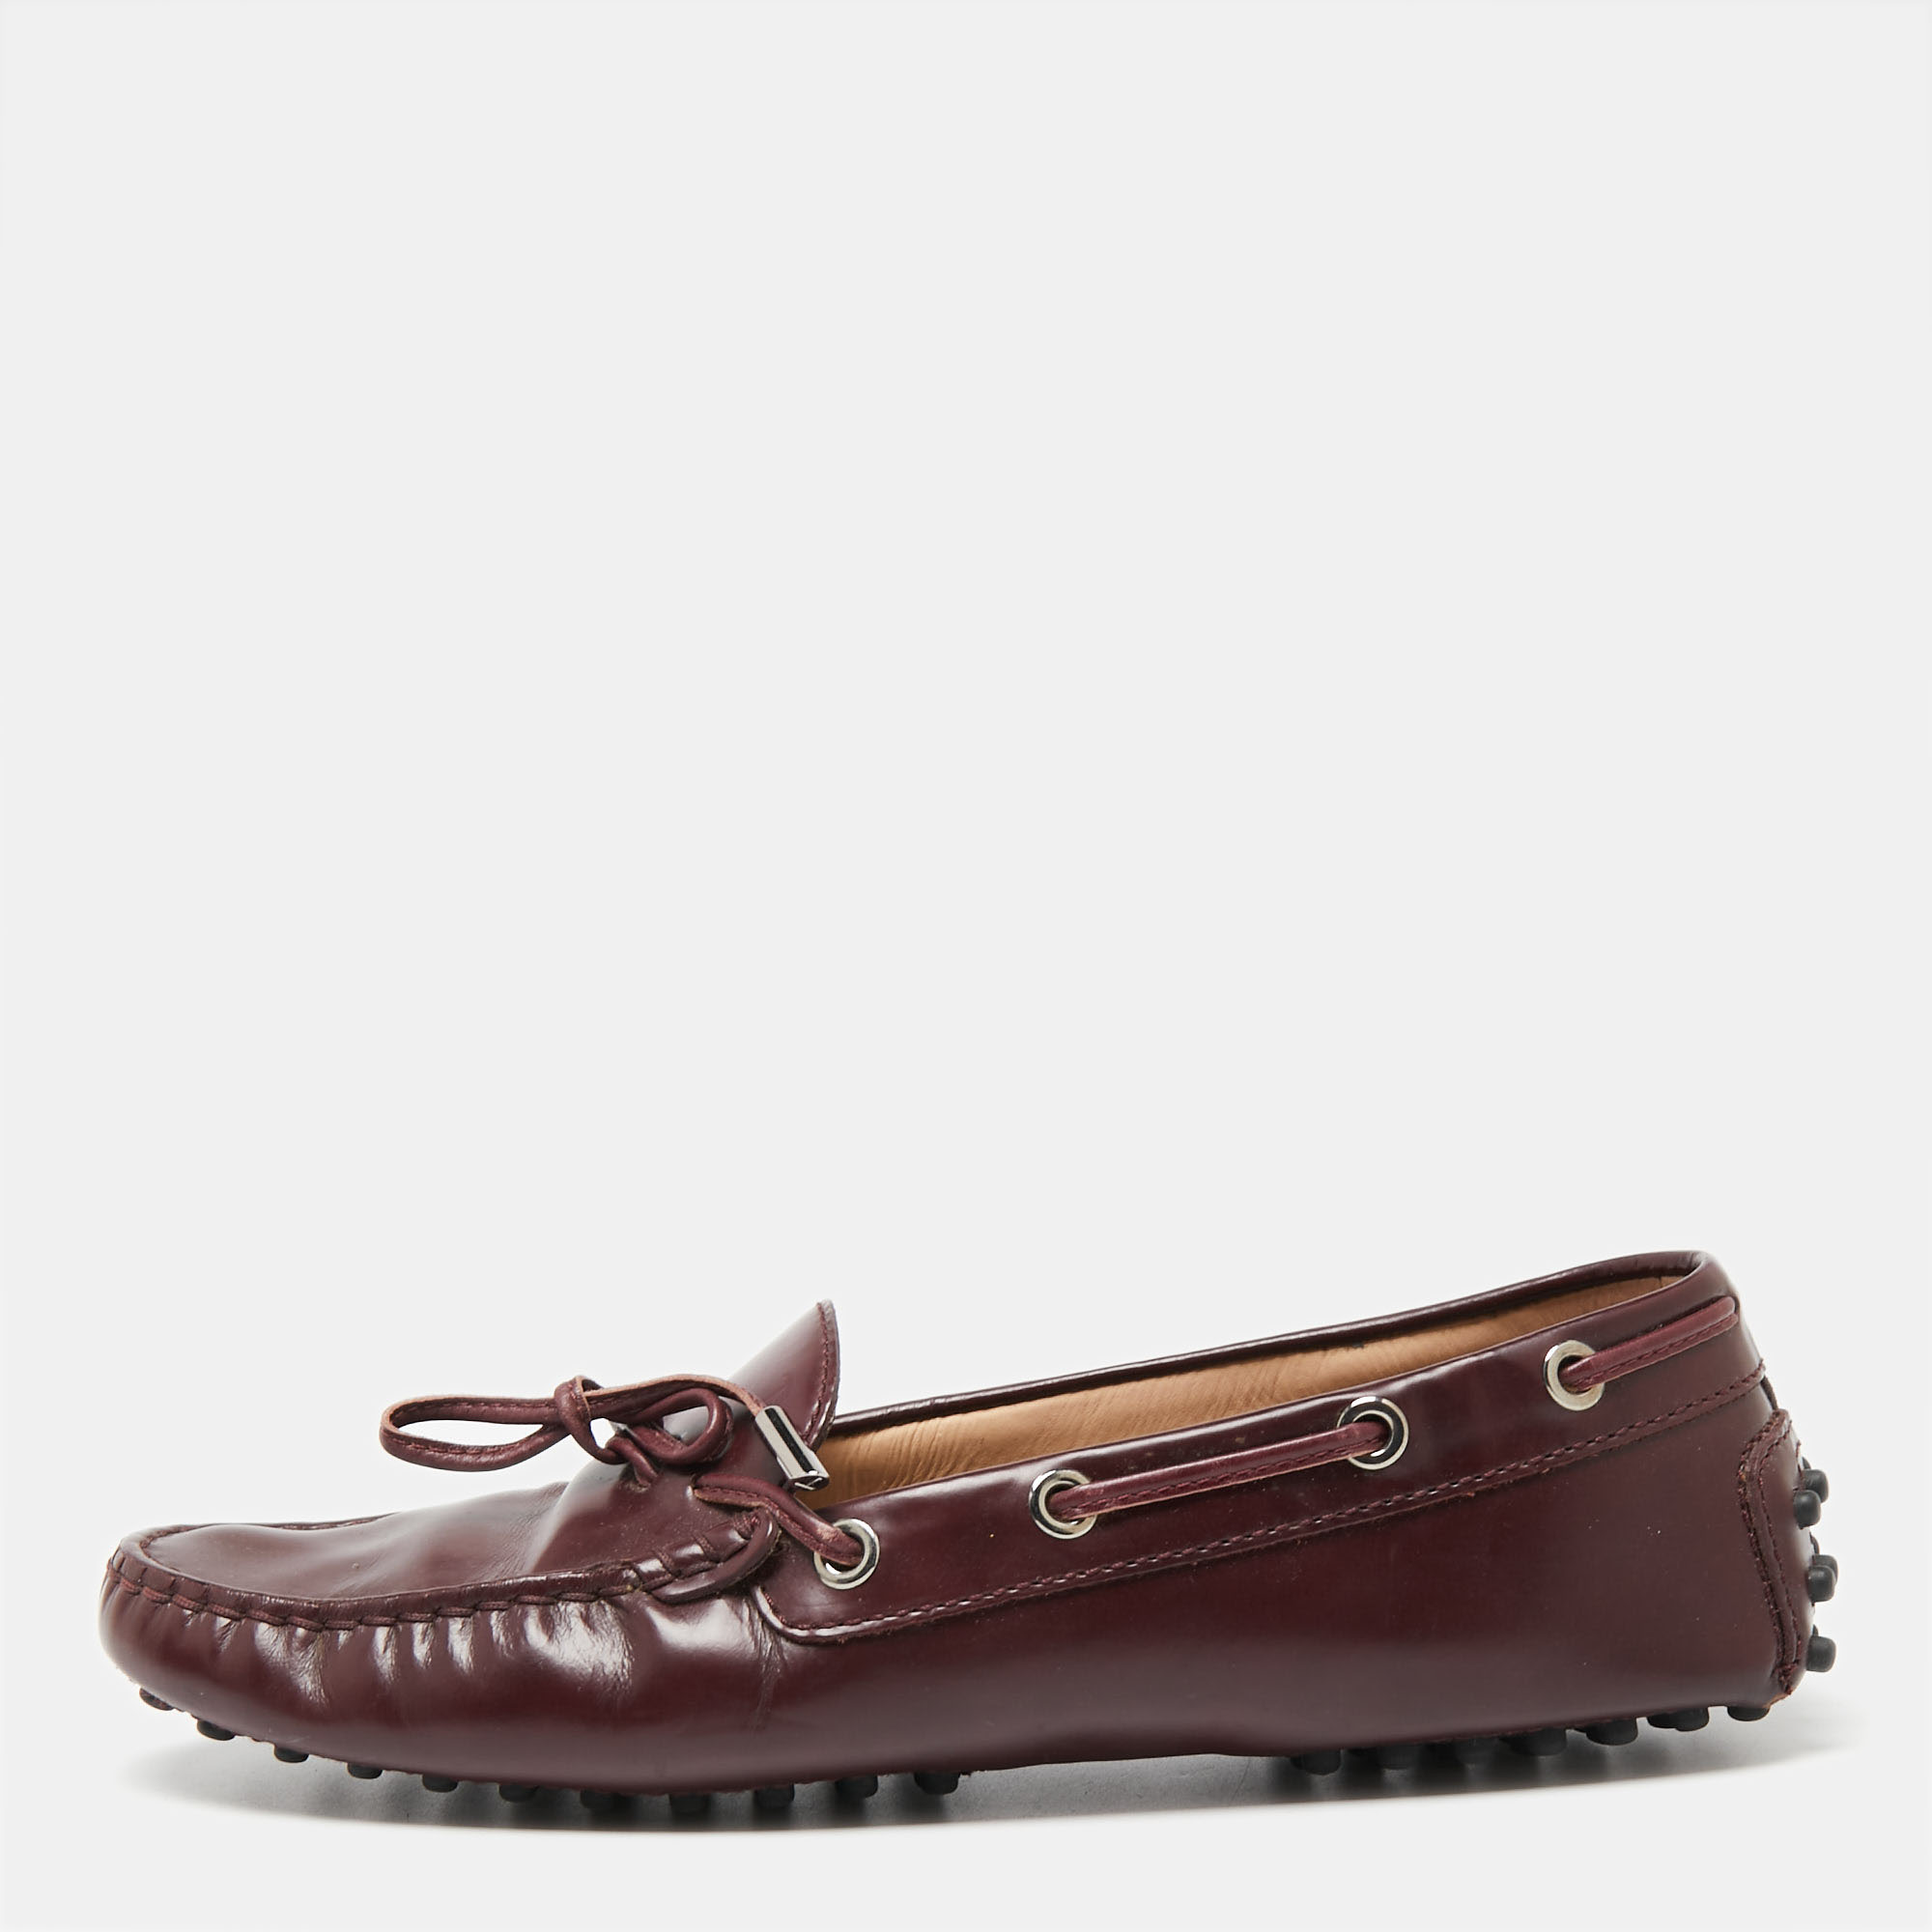 

Tod's Burgundy Leather Bow Slip-On Loafers Size